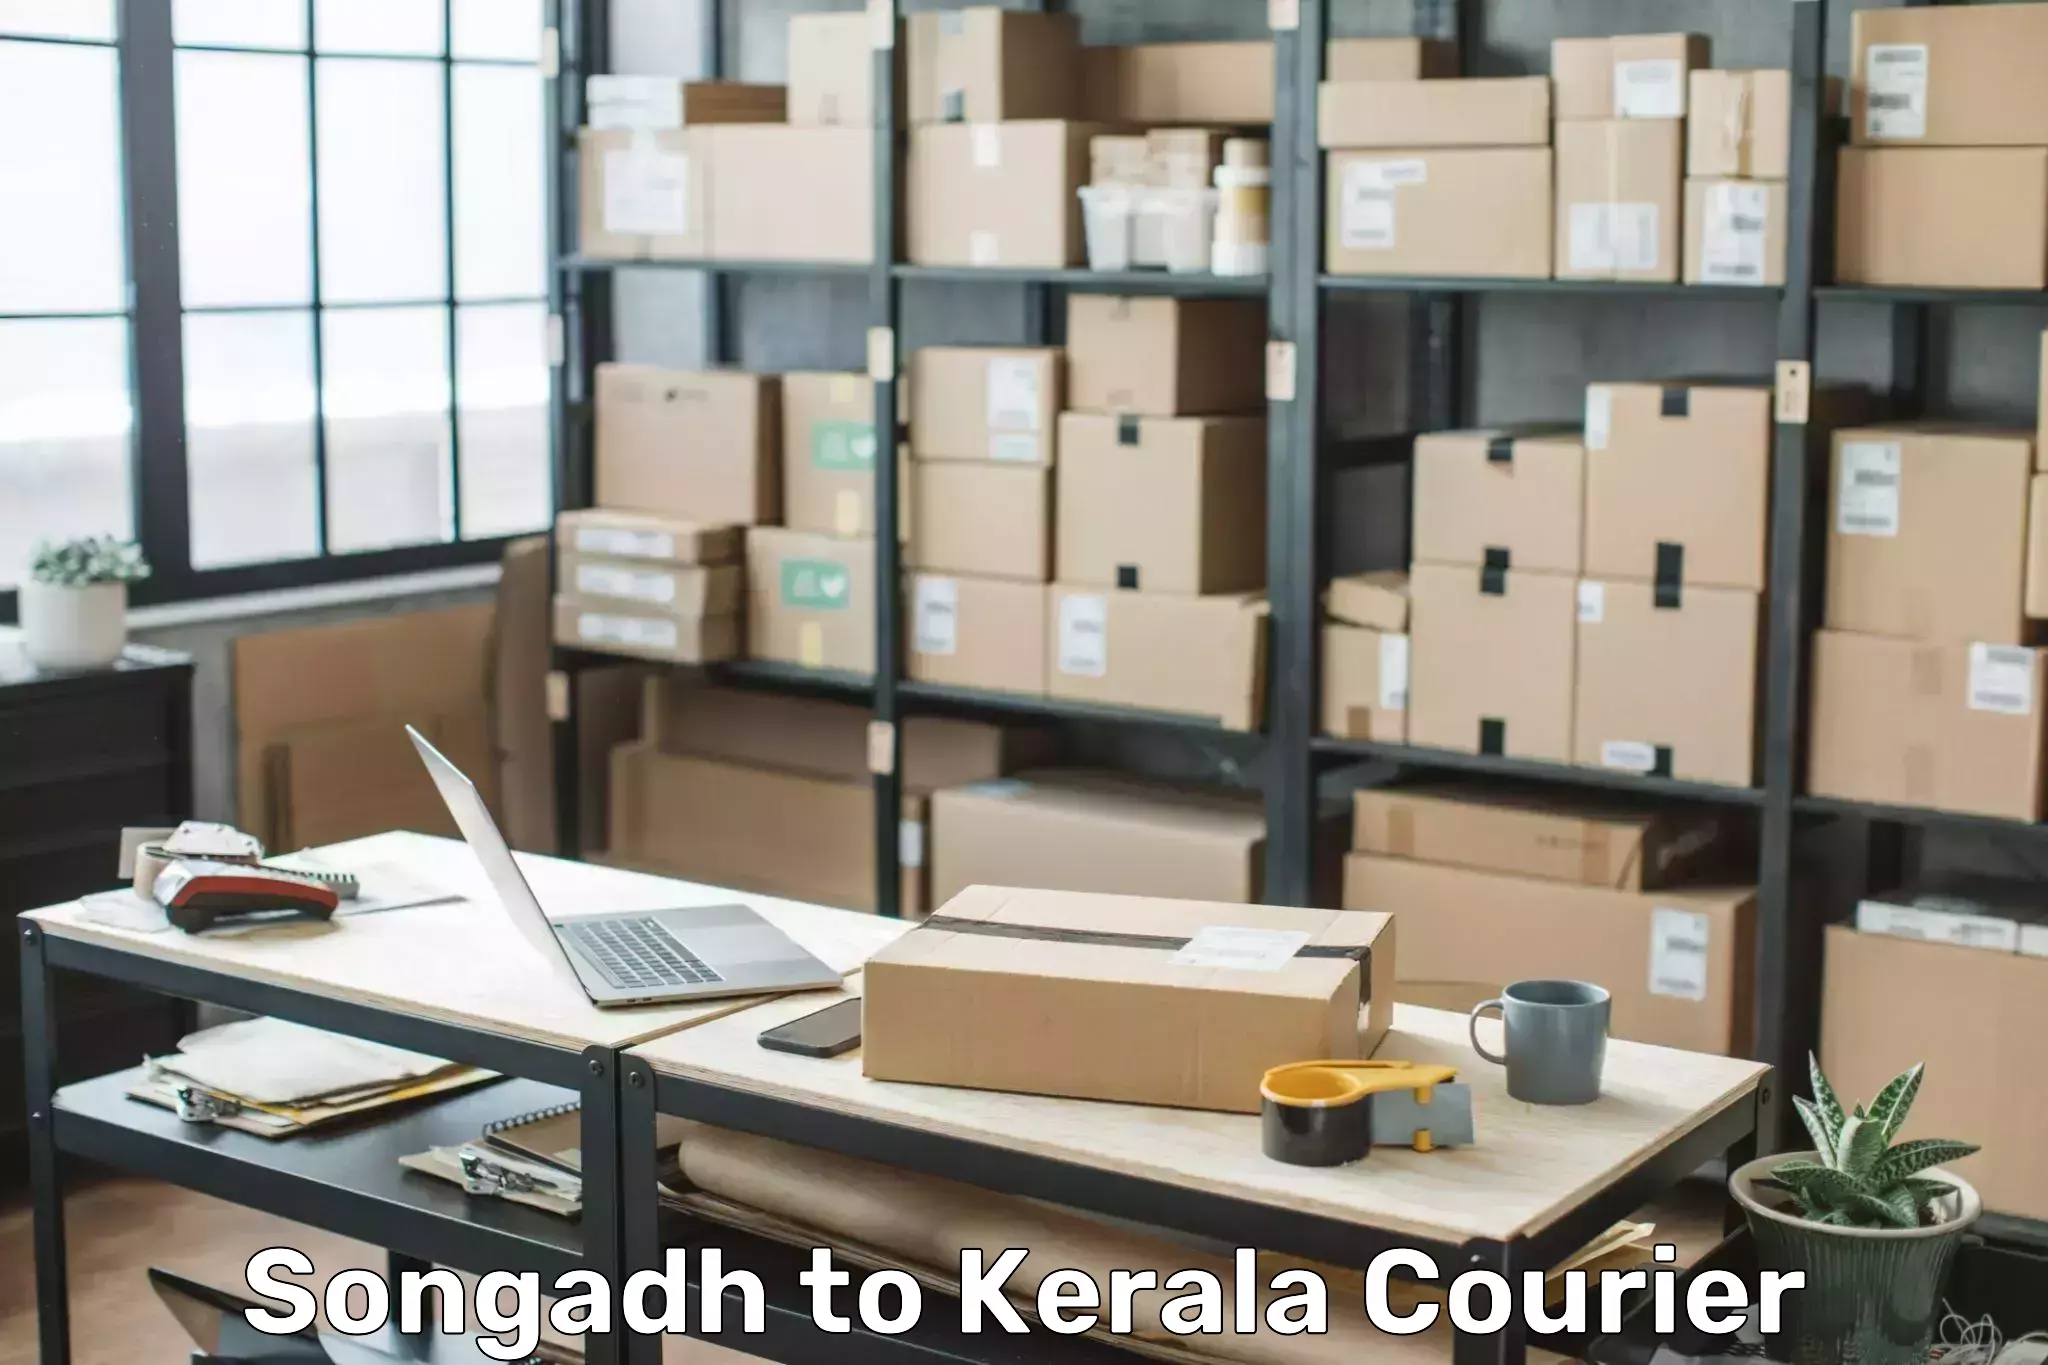 Baggage transport services Songadh to Cochin Port Kochi